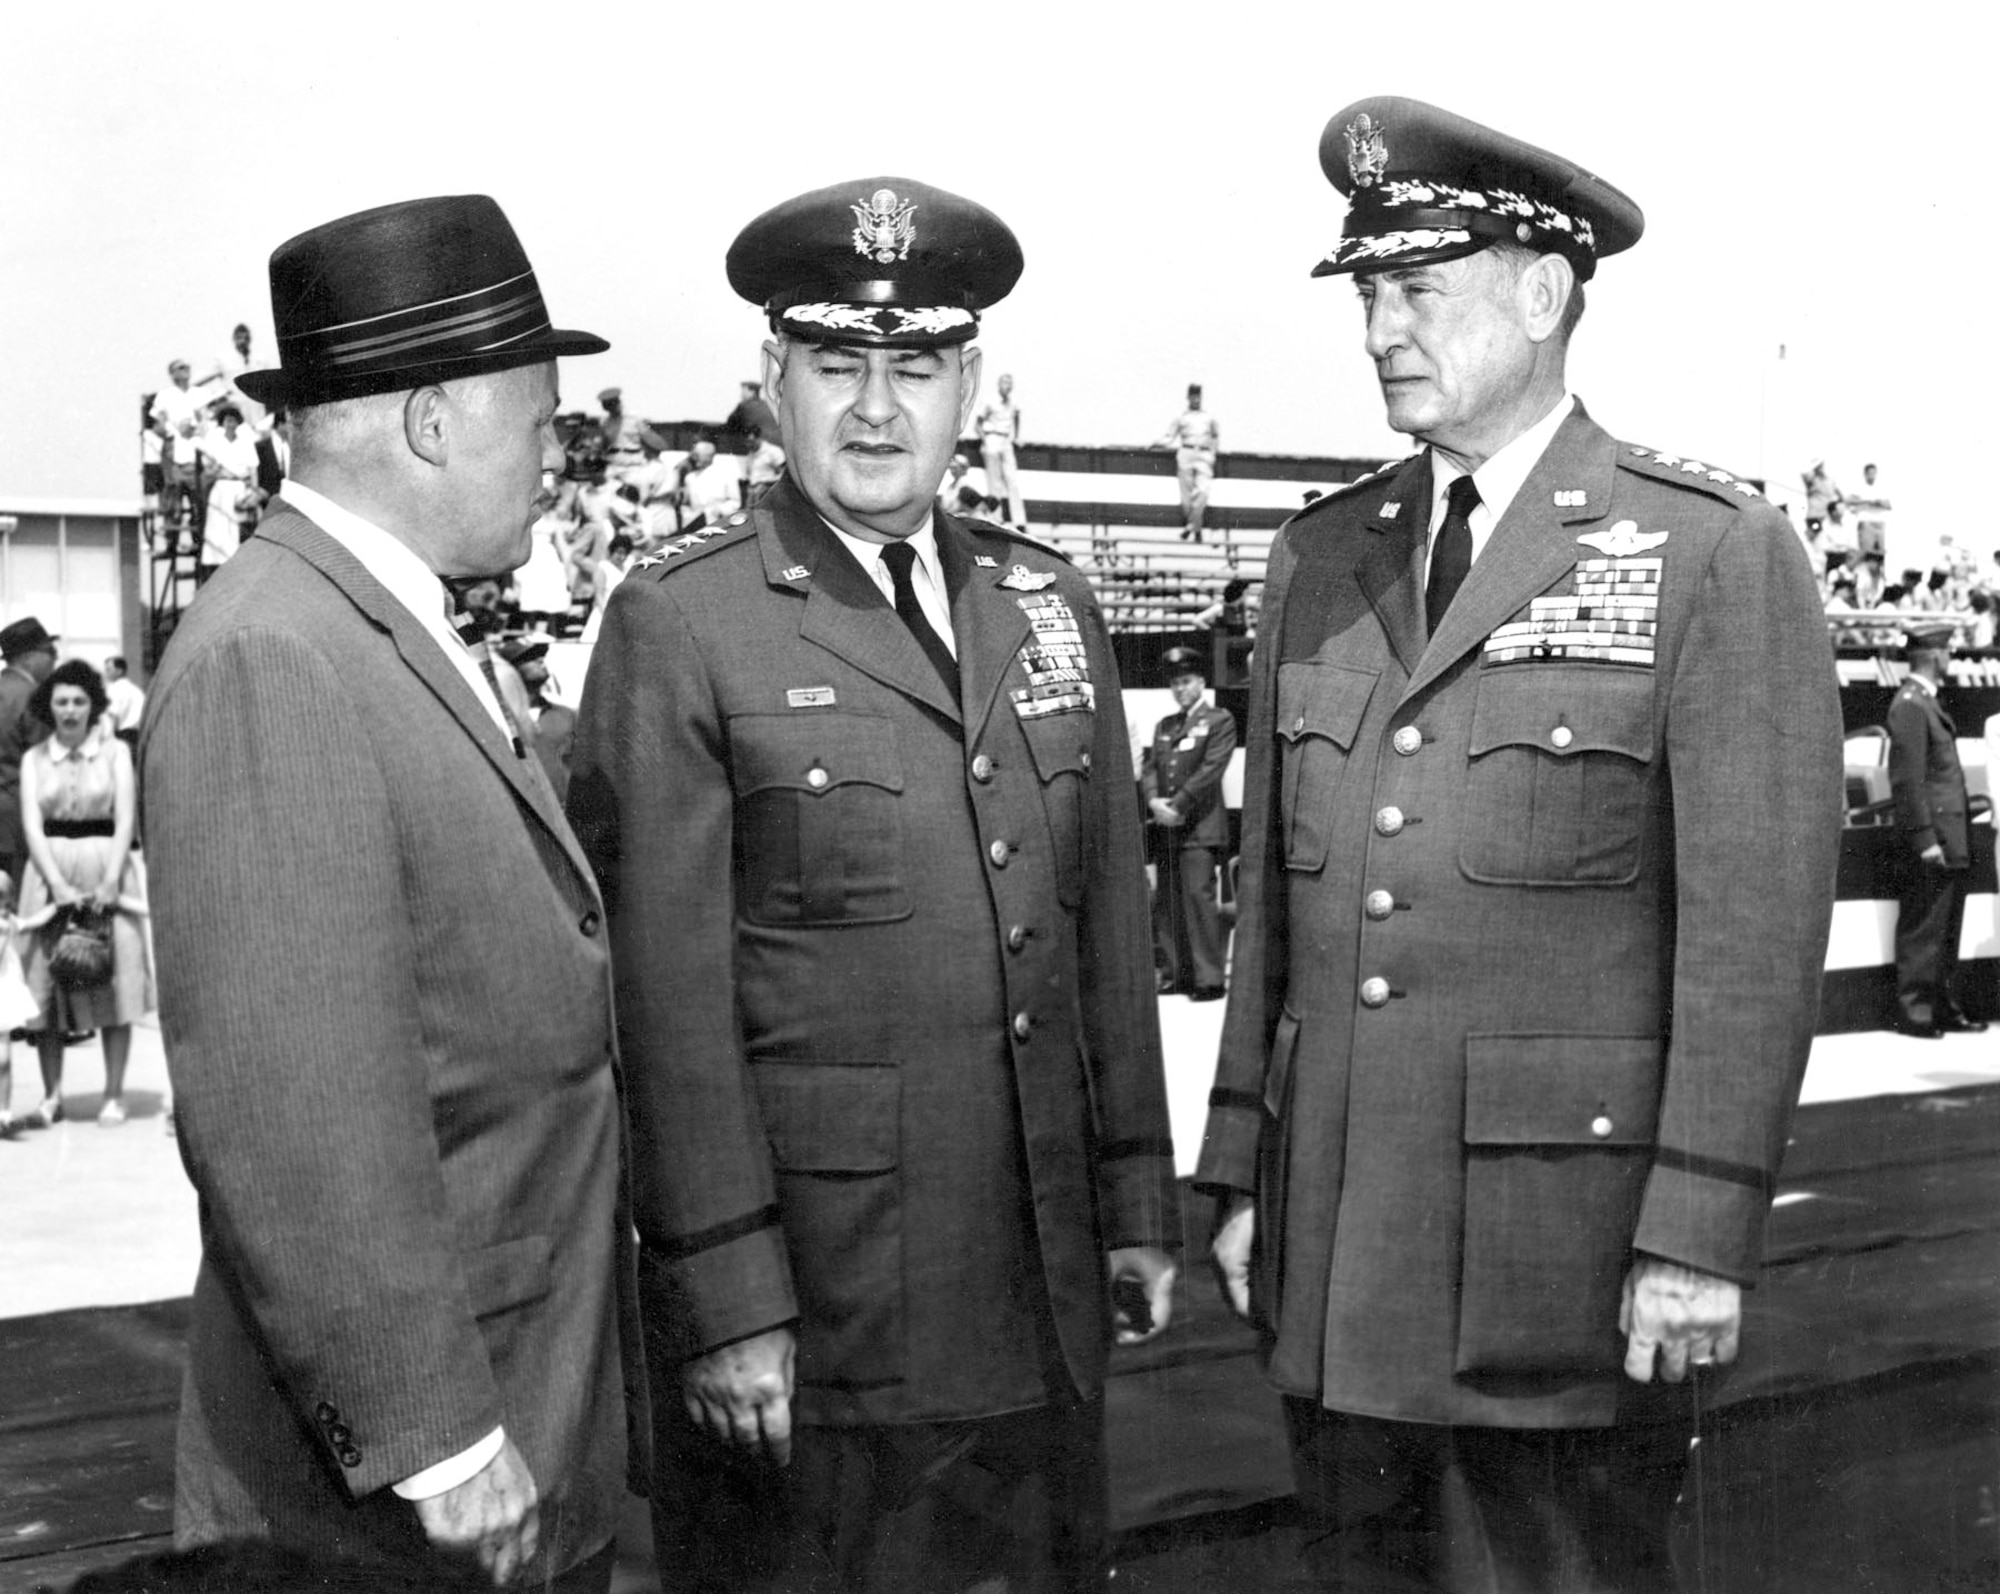 Gen. T.D. White (right) with his successor as Chief of Staff, Gen. Curtis LeMay, and Secretary of the Air Force Eugene M. Zuckert, at White’s retirement ceremony. (U.S. Air Force photo)